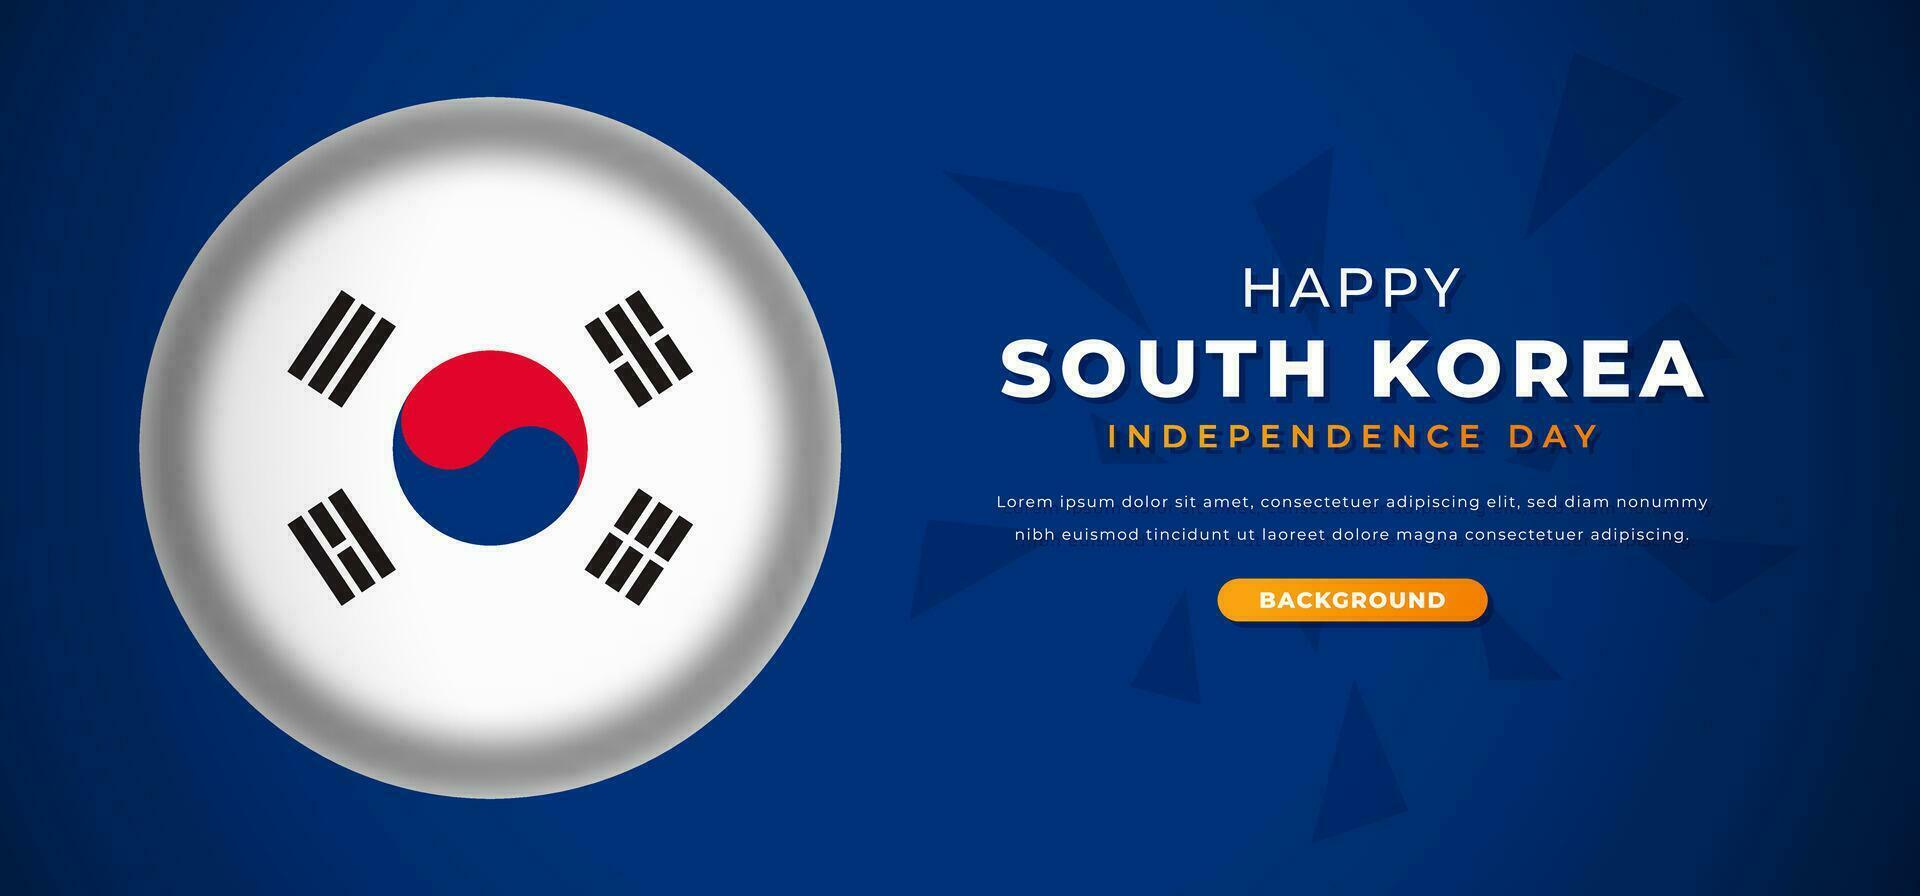 Happy South Korea Independence Day Design Paper Cut Shapes Background Illustration for Poster, Banner, Advertising, Greeting Card vector